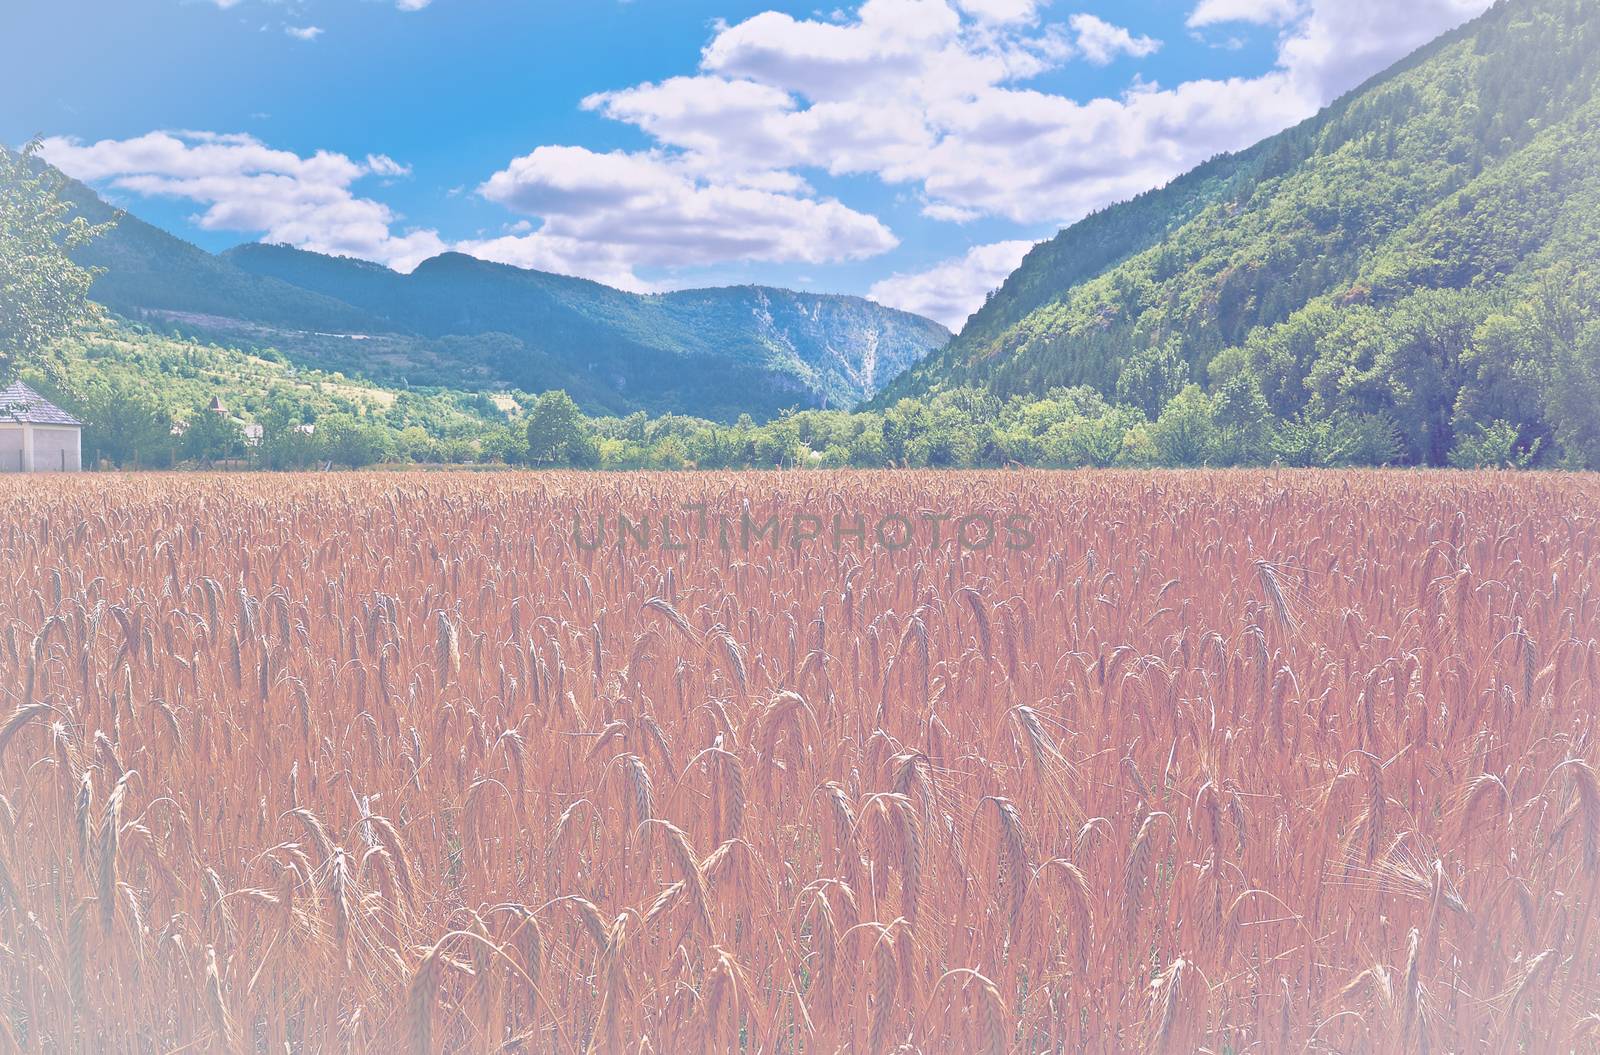 Desert field in faded color effect. Wheat harvest in France.